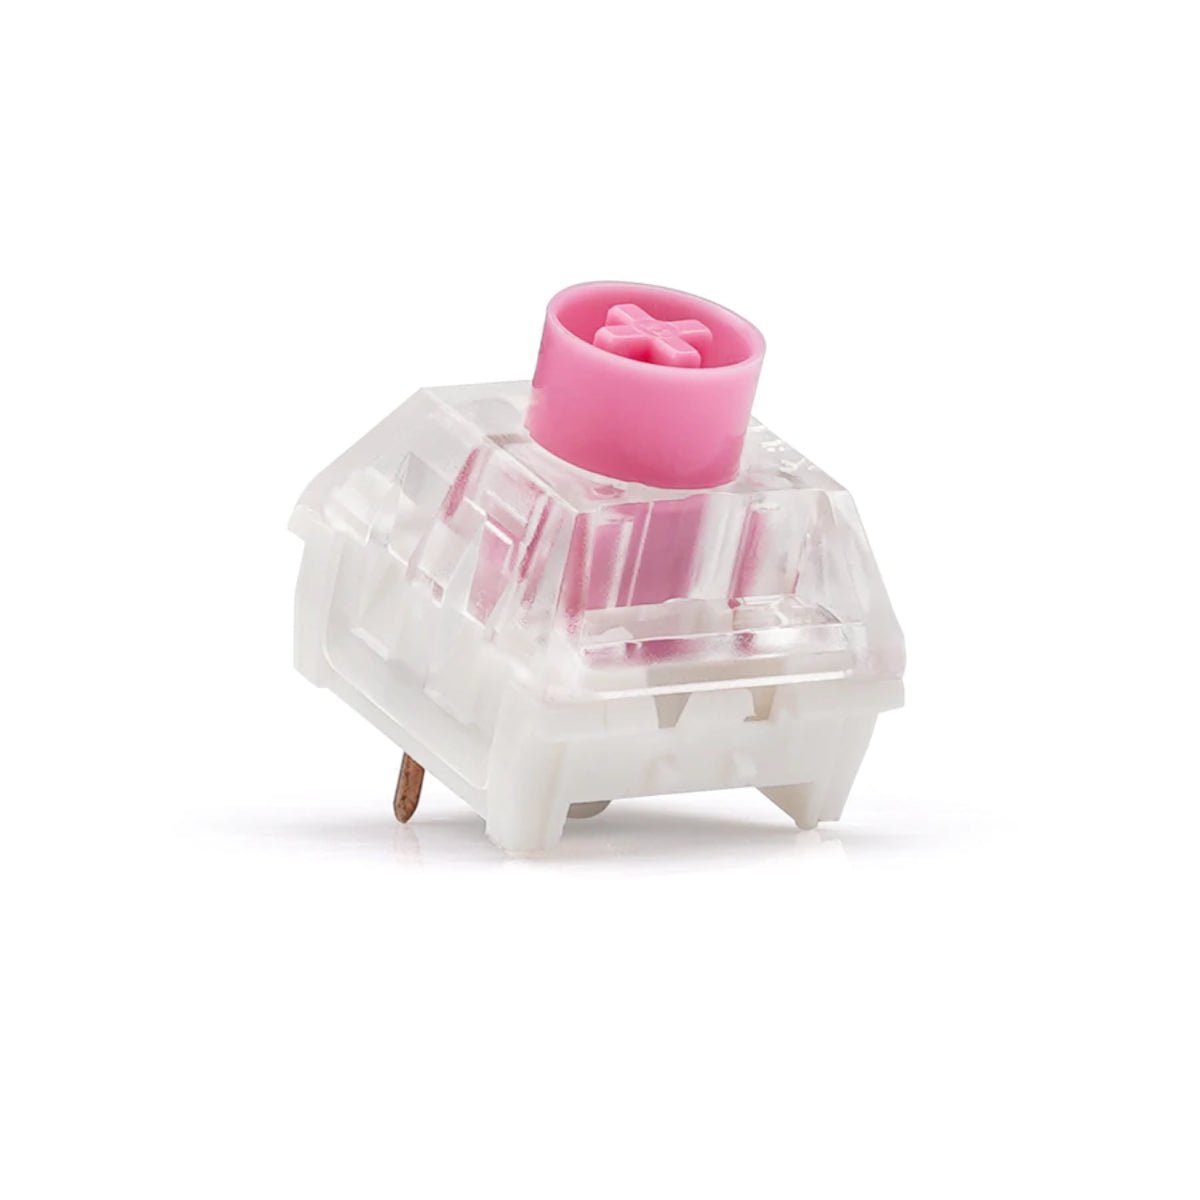 KBD Fans Kailh Box Silent Switches - Pink - Store 974 | ستور ٩٧٤